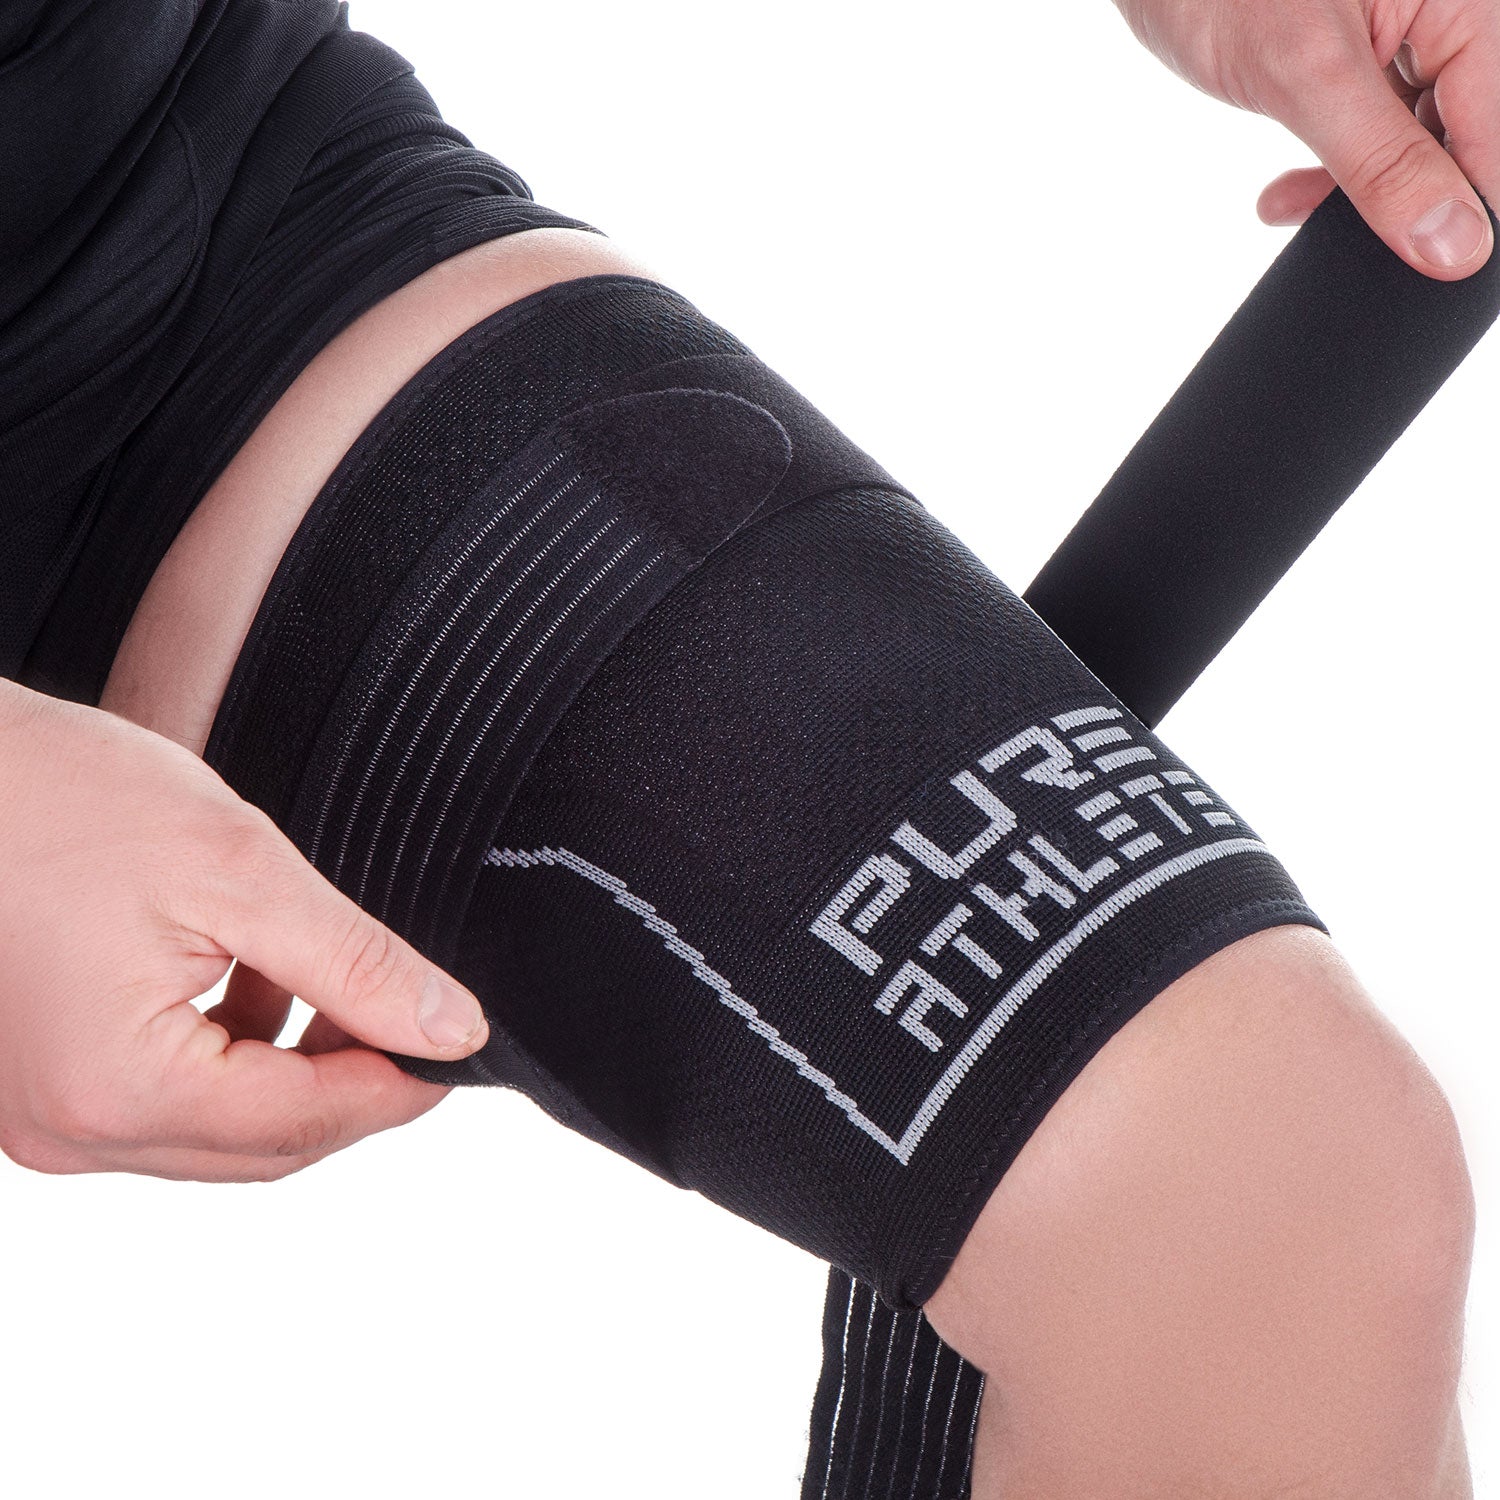 Hamstring Compression Sleeve pair Copper Infused Thigh Compression Sleeve,  Quad and Hamstring Support for men and Women-Ideal for running,Groin Pulls, Thigh Pain Relief Medium Black&Gold